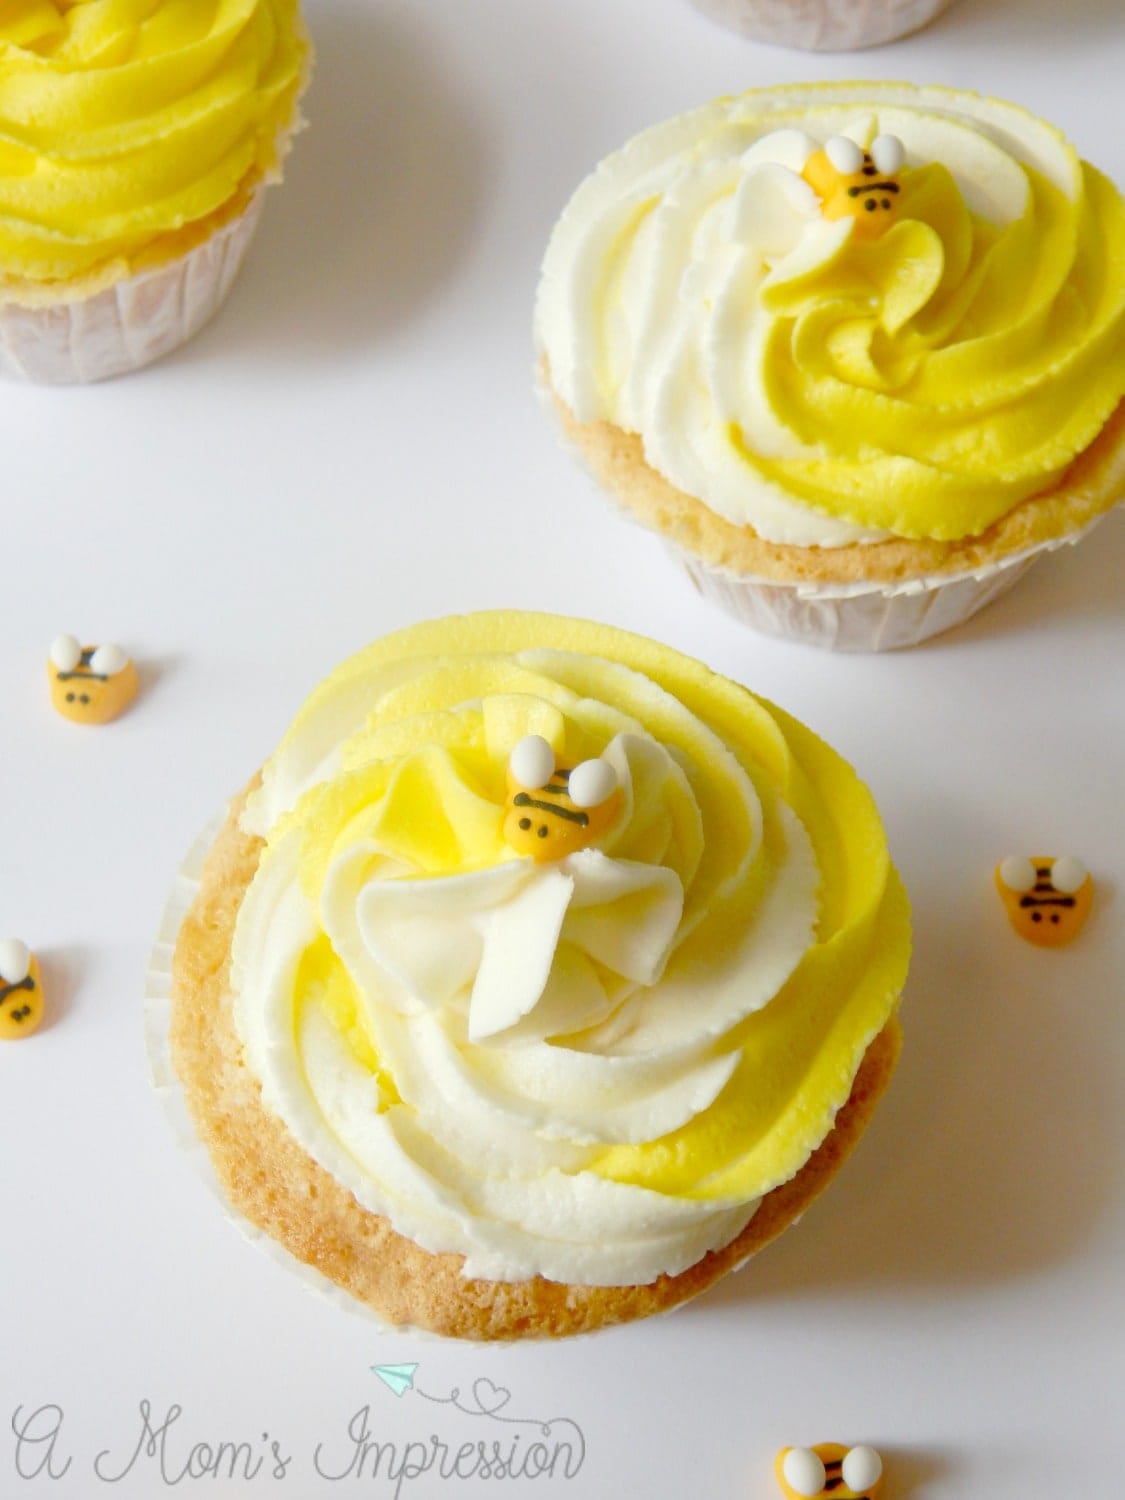 These easy bumblebee cupcakes would be perfect for a birthday party or other summer occasion! The almond frosting recipe is great for all kinds of dessert recipes as well - you'll want to pin this one for later! #ad